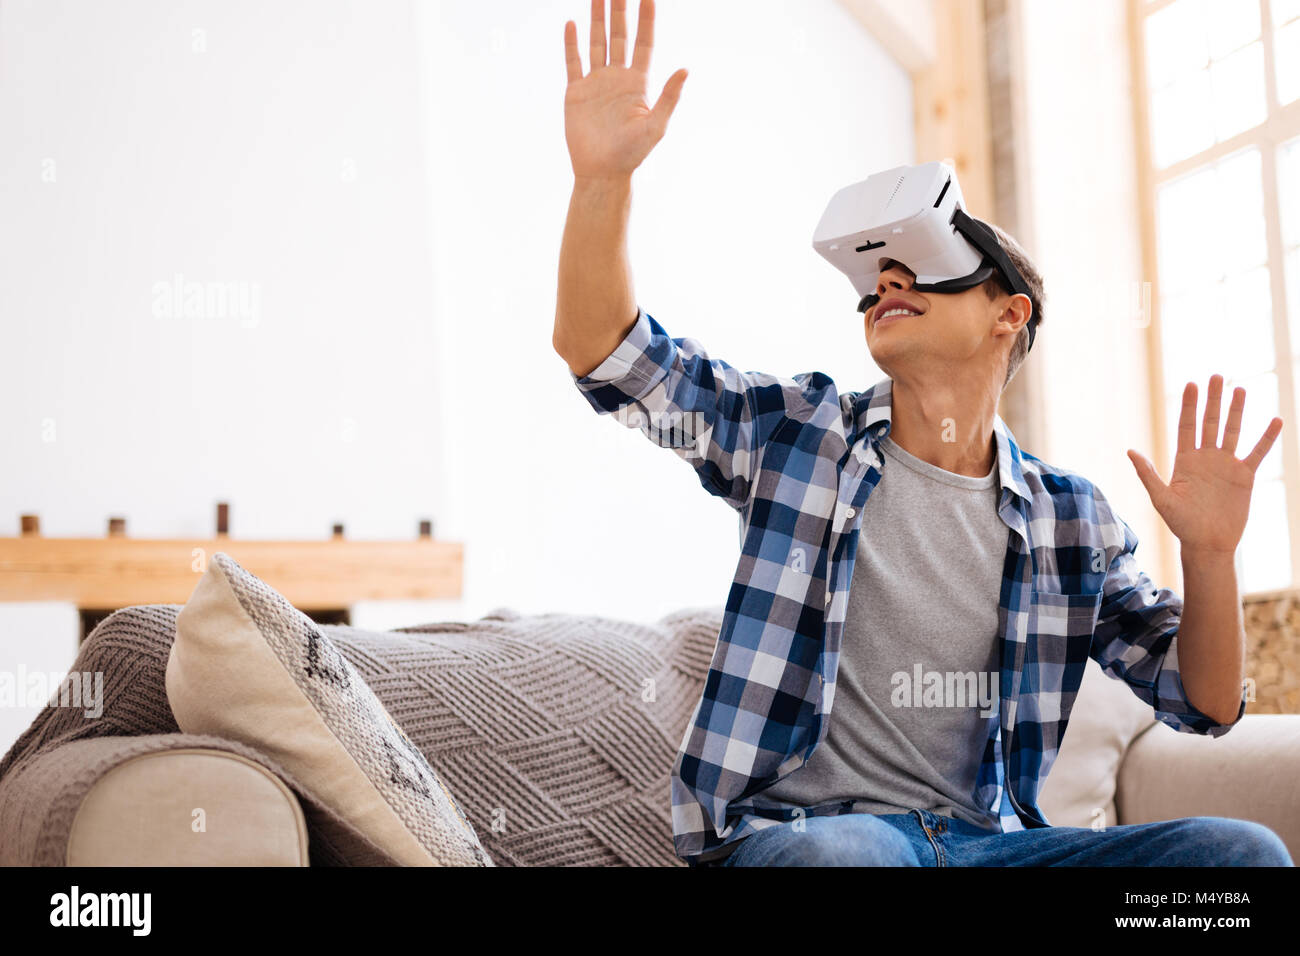 Alert adolescent wearing a VR headset Stock Photo